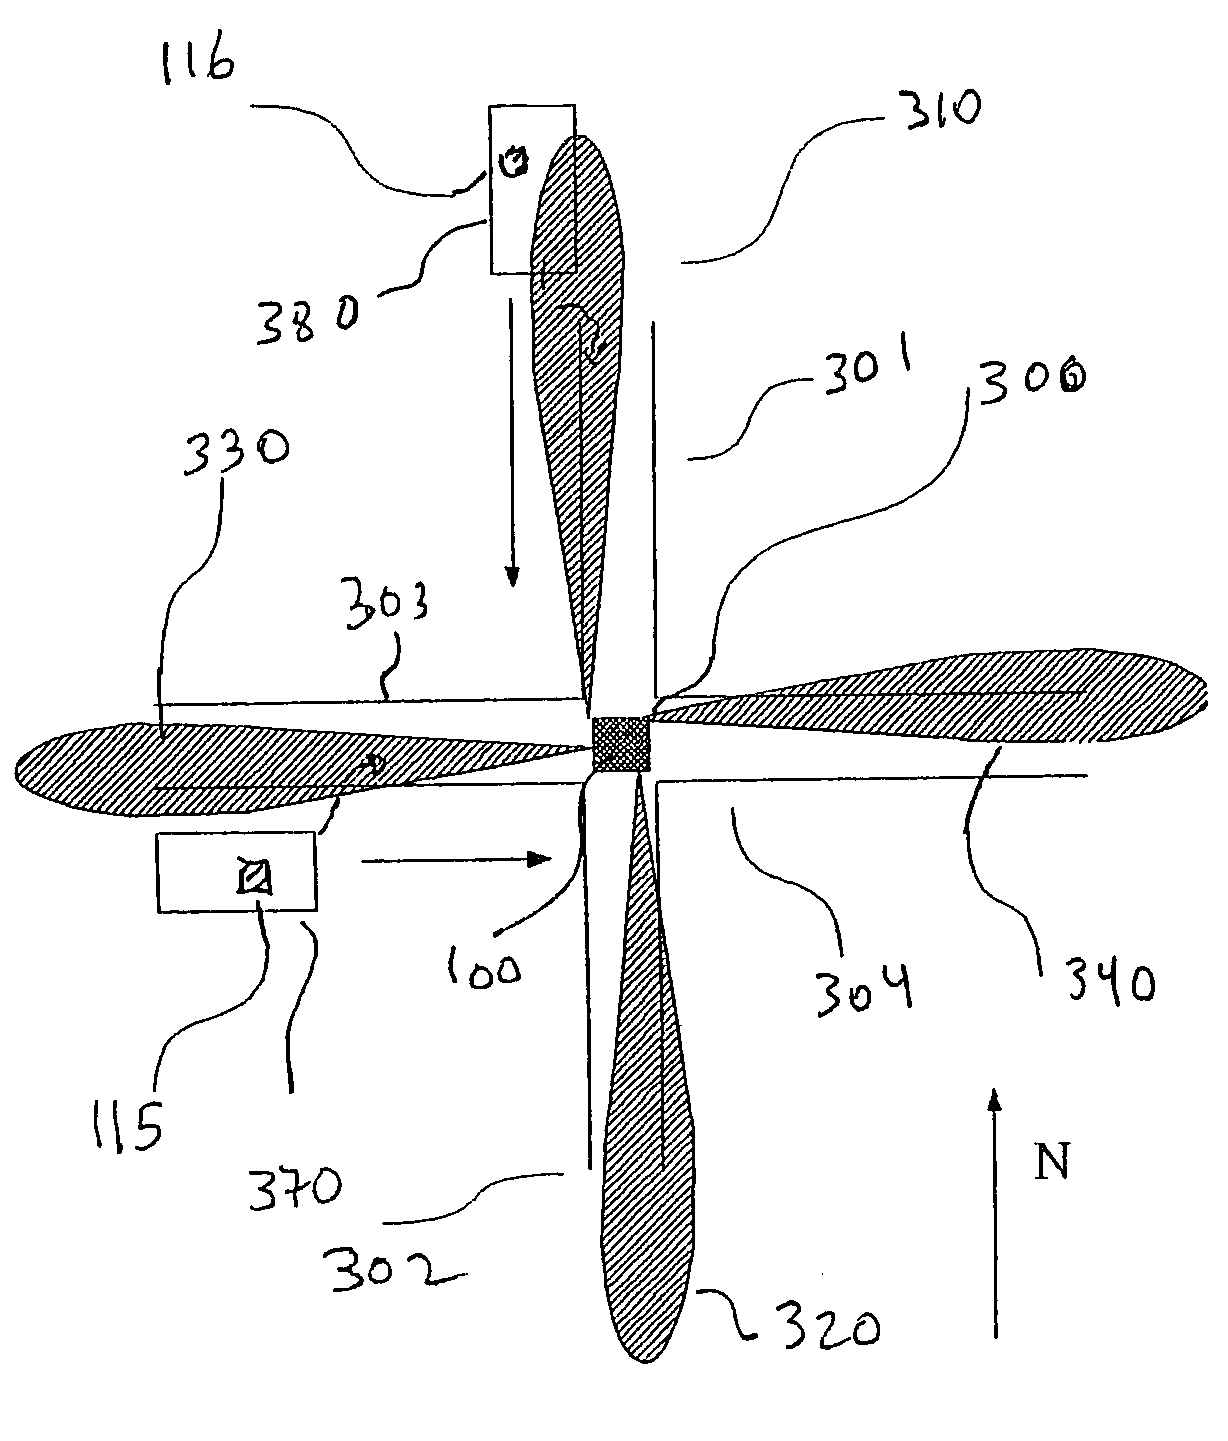 Traffic management device and system